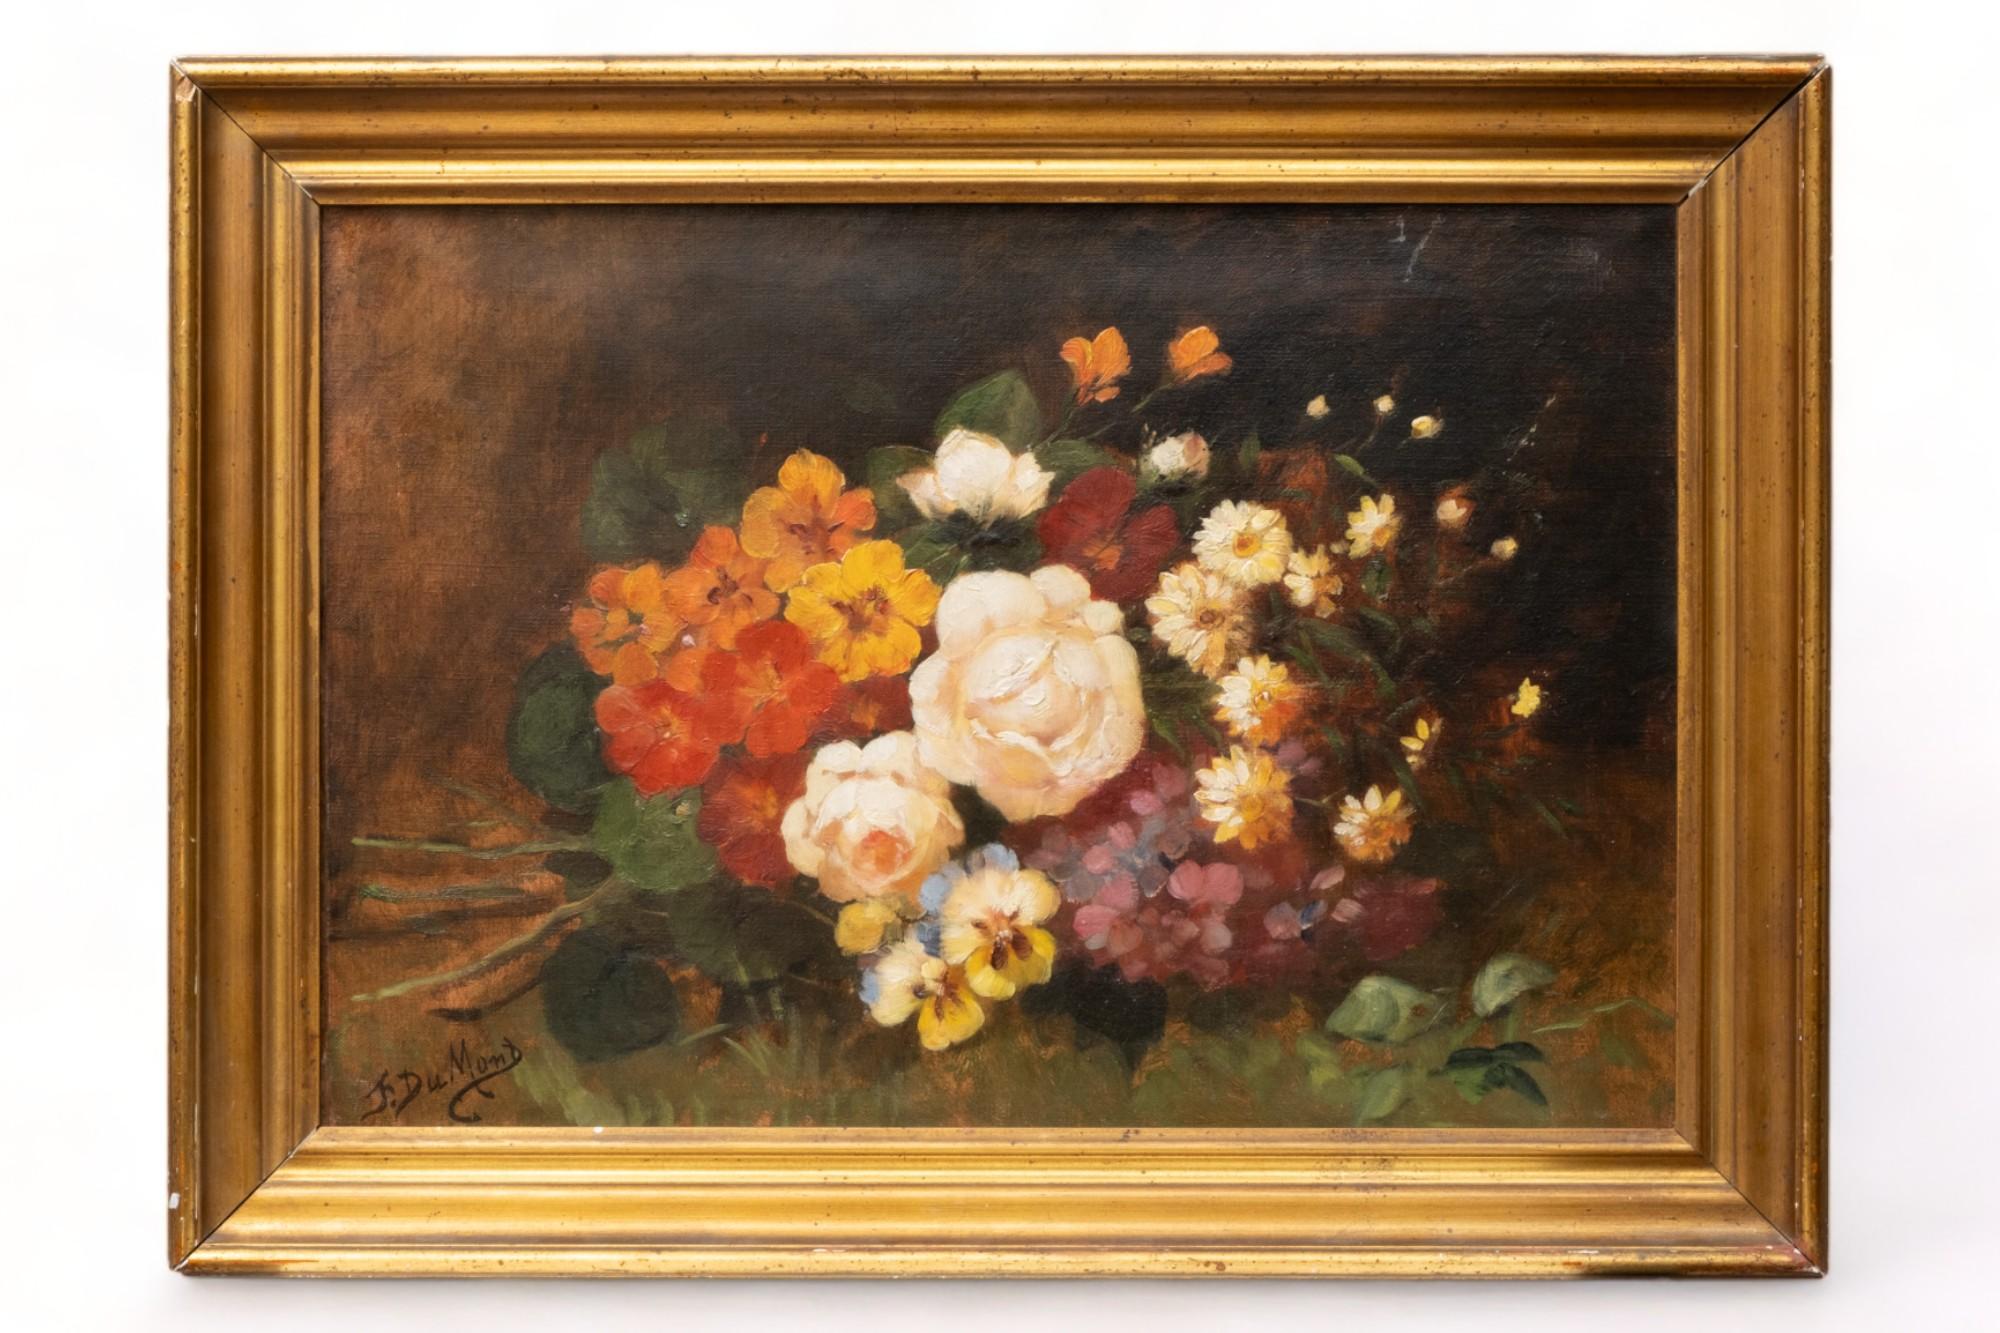 Signed Oil On Canvas Flower Boquet Still Life Attributed to François DUMONT Signed lower left. François Dumont (Born 1850) was active/lived in Belgium. Francois Dumont is known for Painting Scenes reflecting the life of the times and floral still